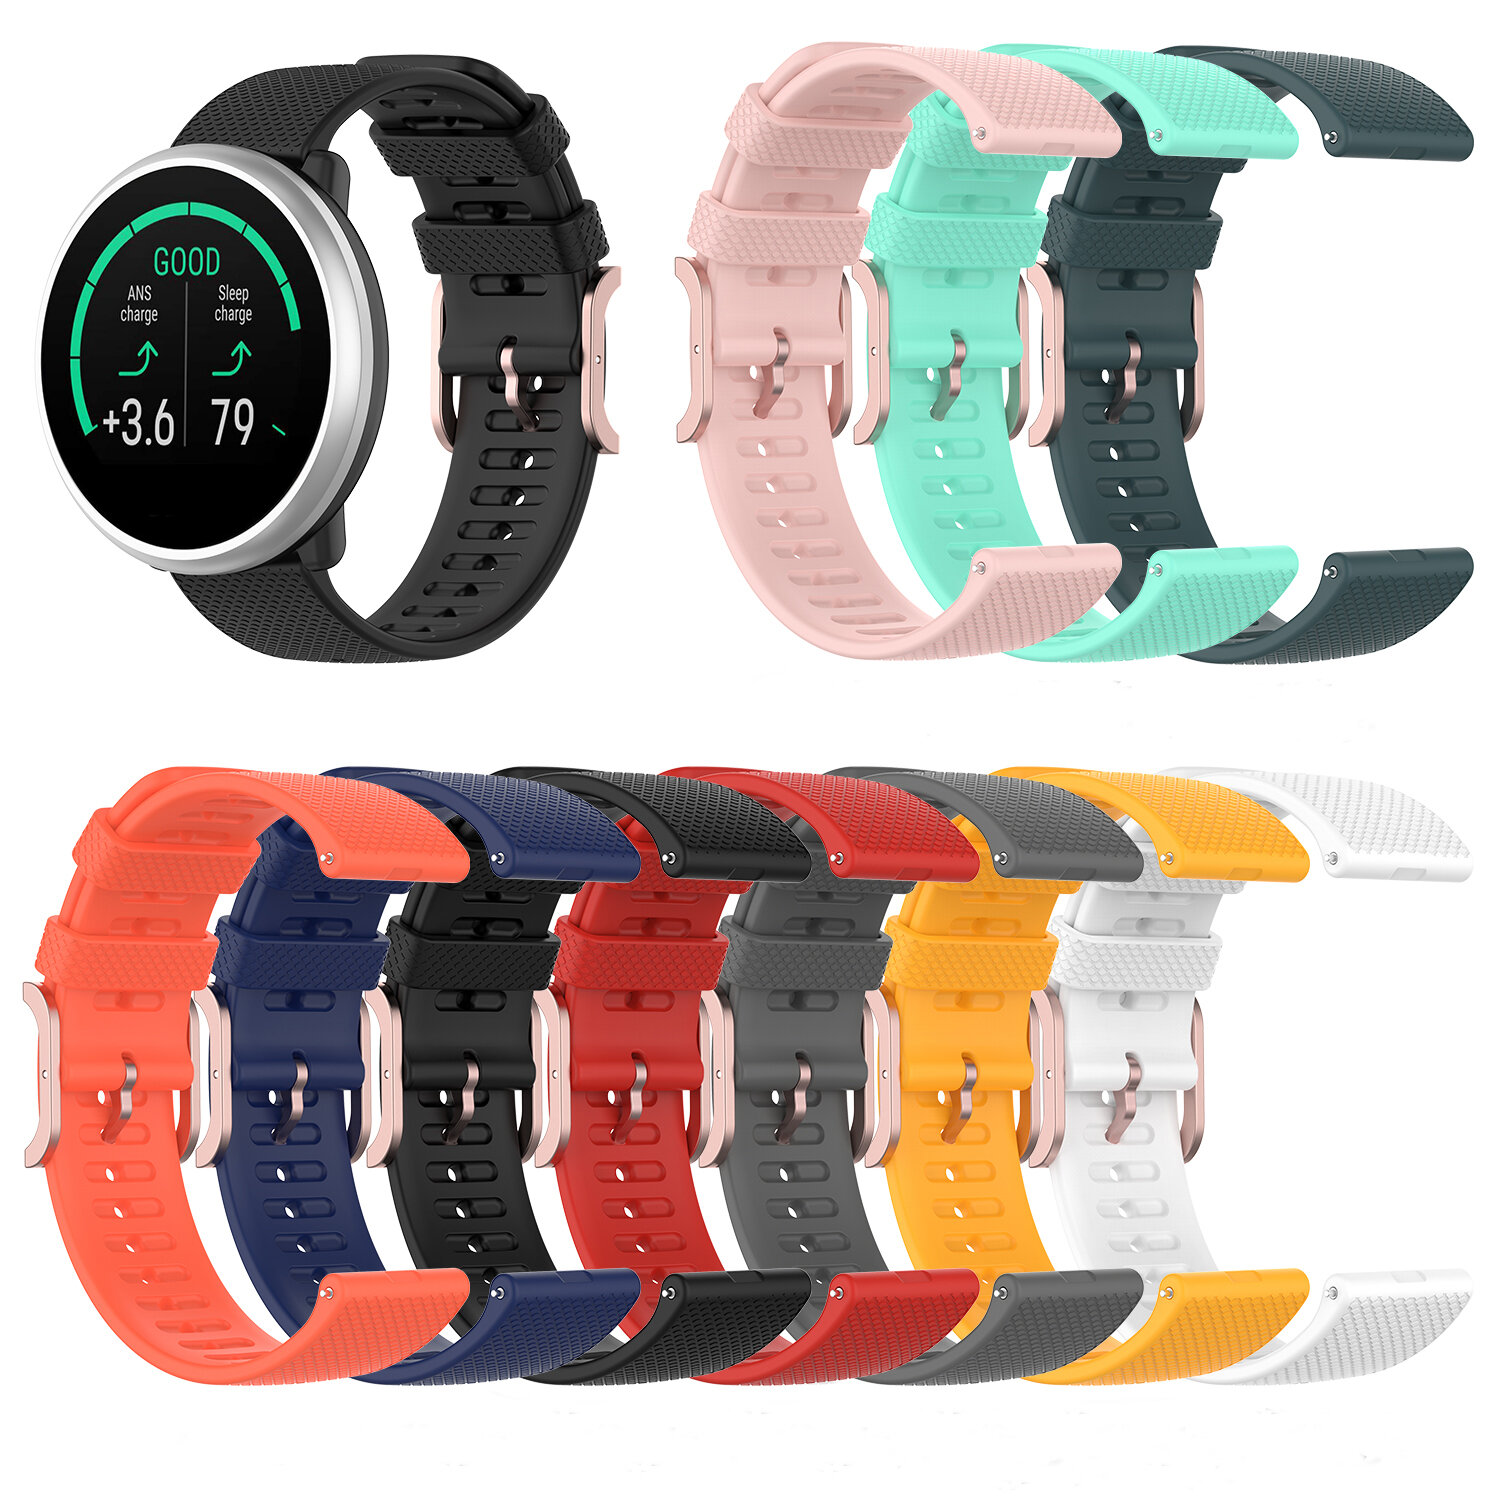 Bakeey 20mm Dot Pattern Silicone Smart Watch Band Replacement Strap For POLAR Ignite/Amazfit BIP/Huawei Watch GT 2 42MM